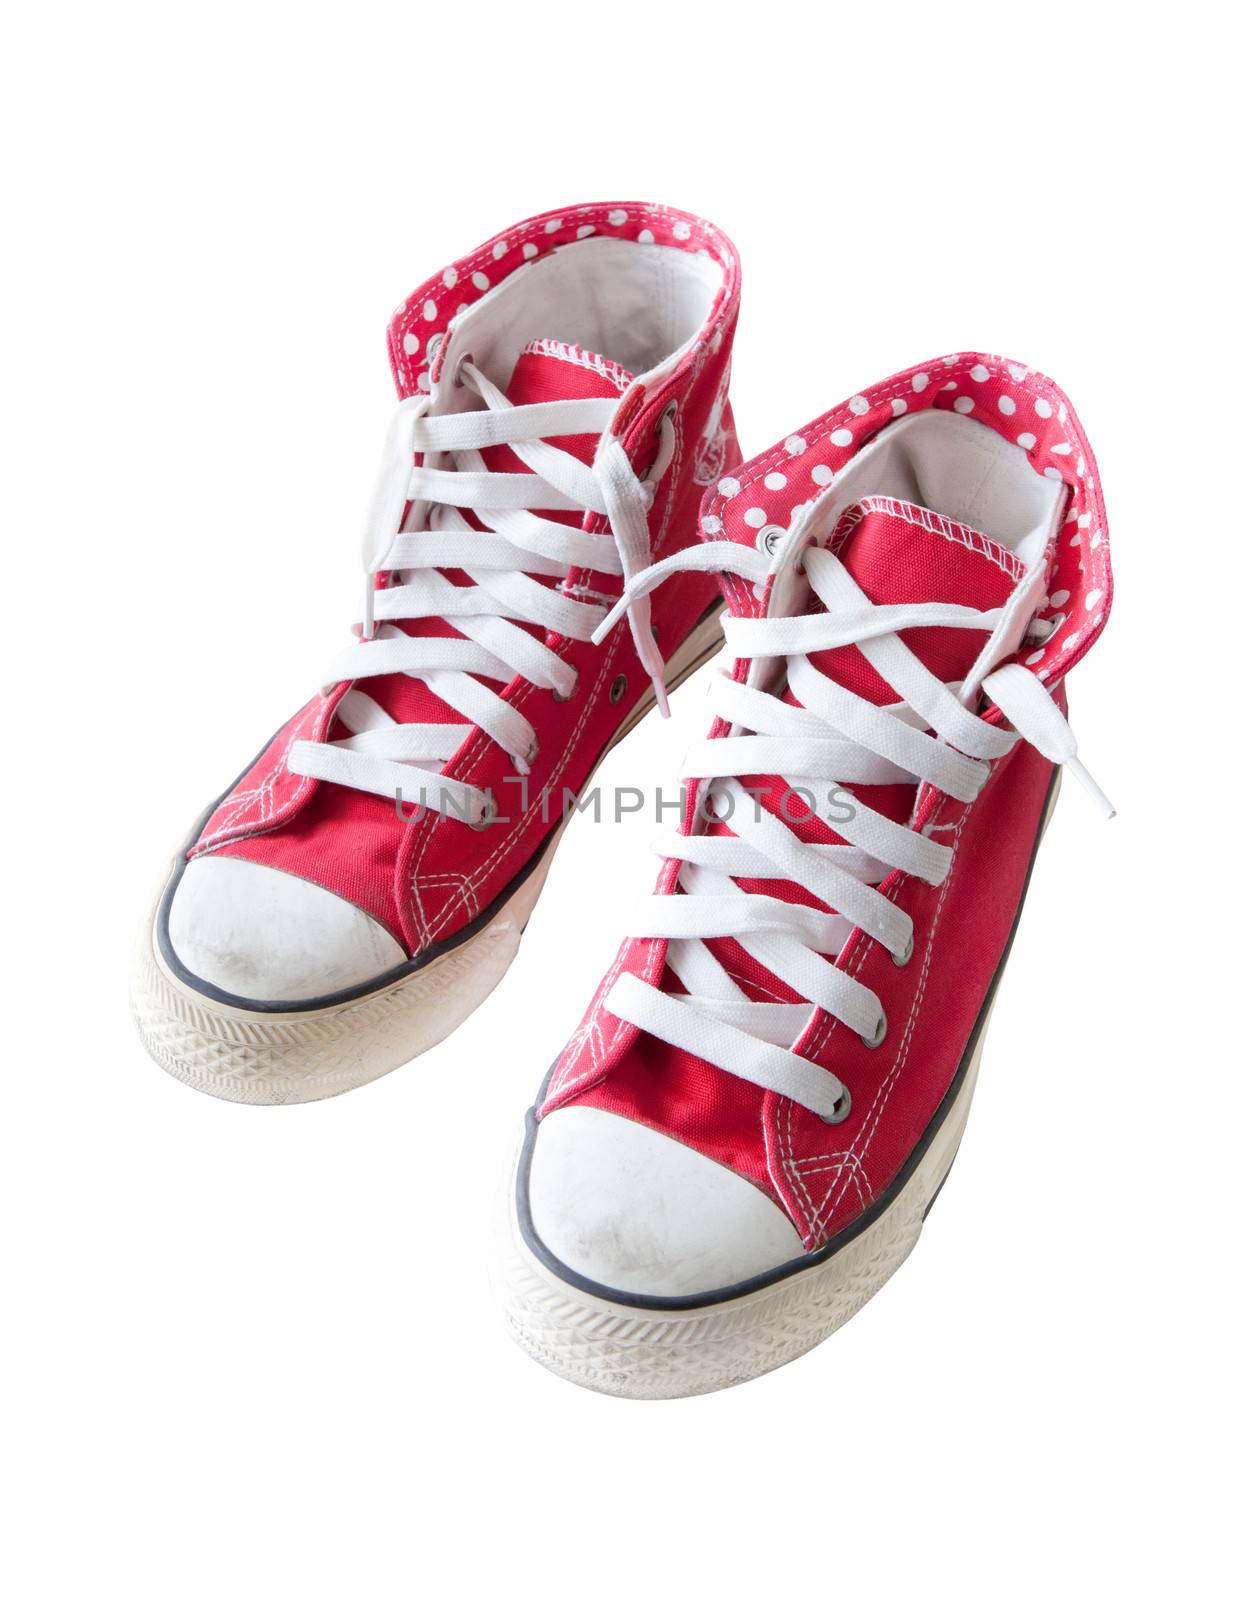 old red  sneaker shoes isolated white background